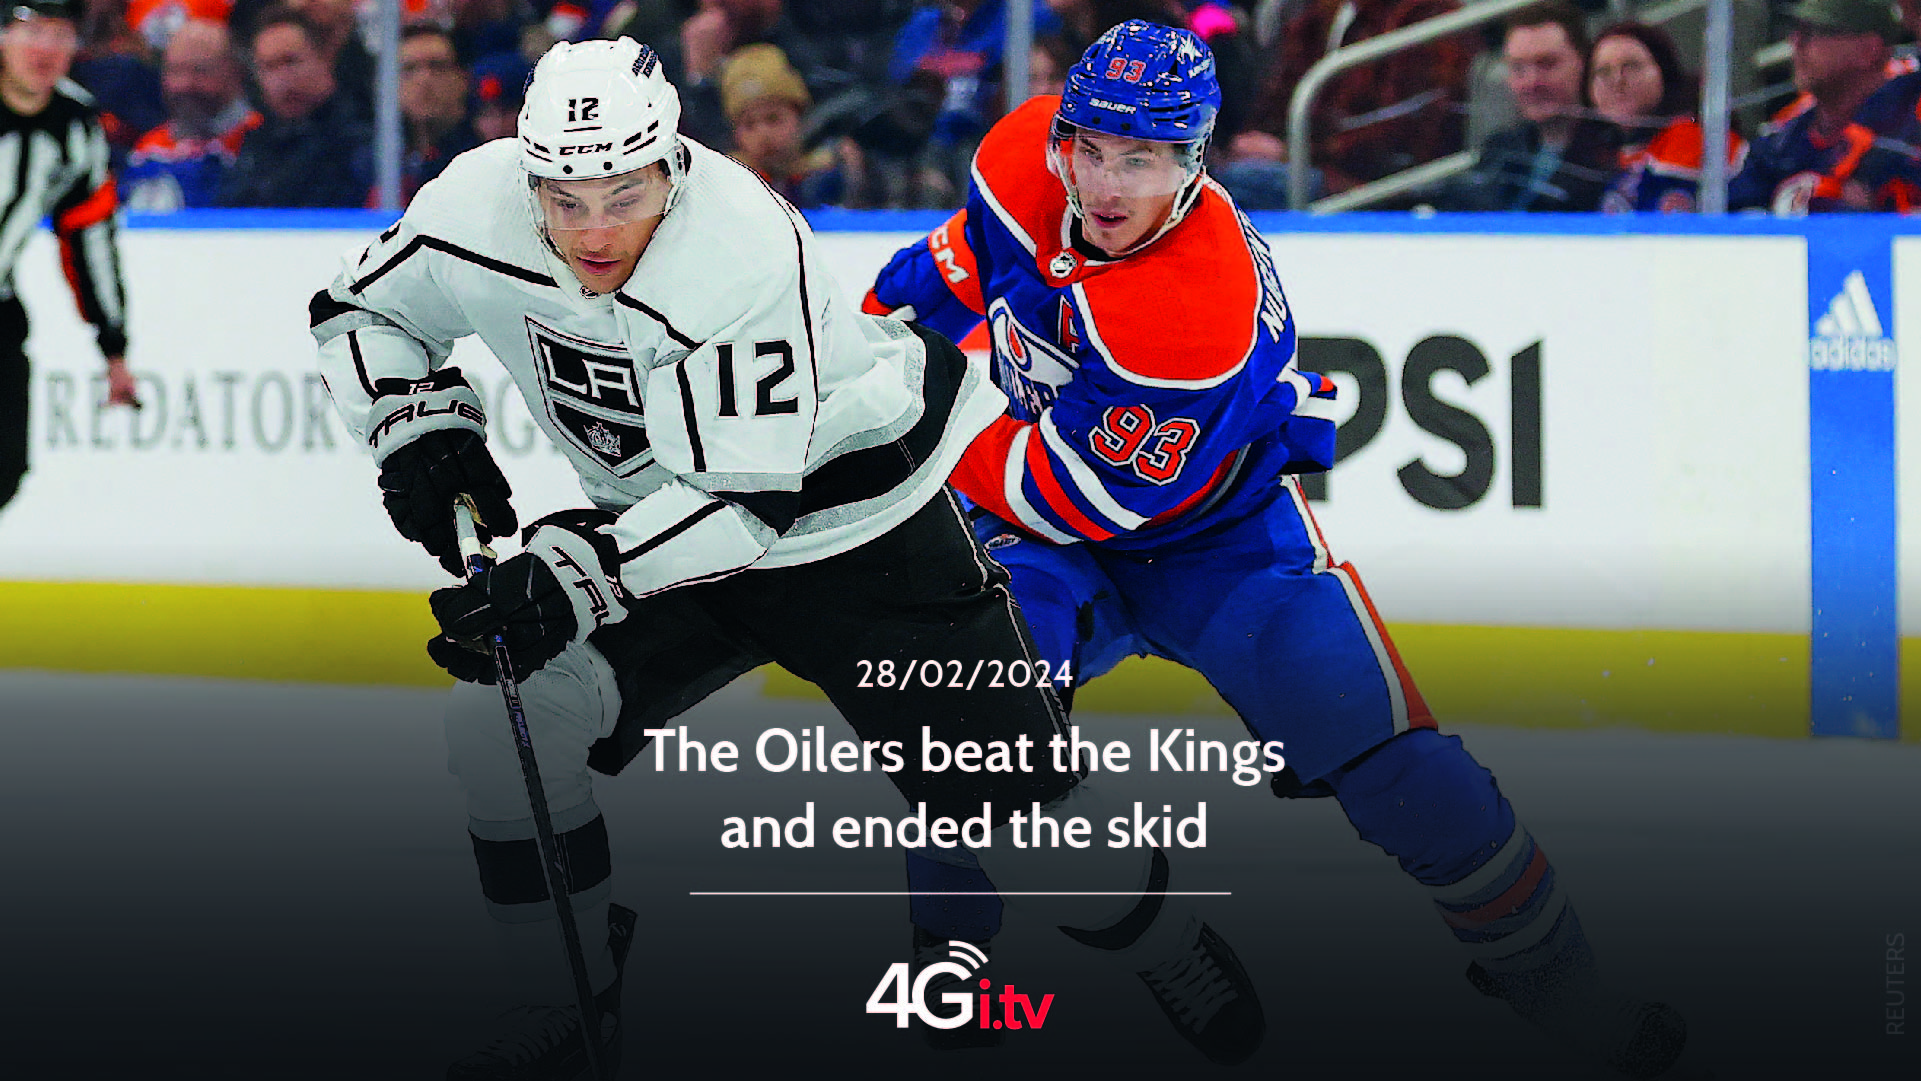 Lesen Sie mehr über den Artikel The Oilers beat the Kings and ended the skid